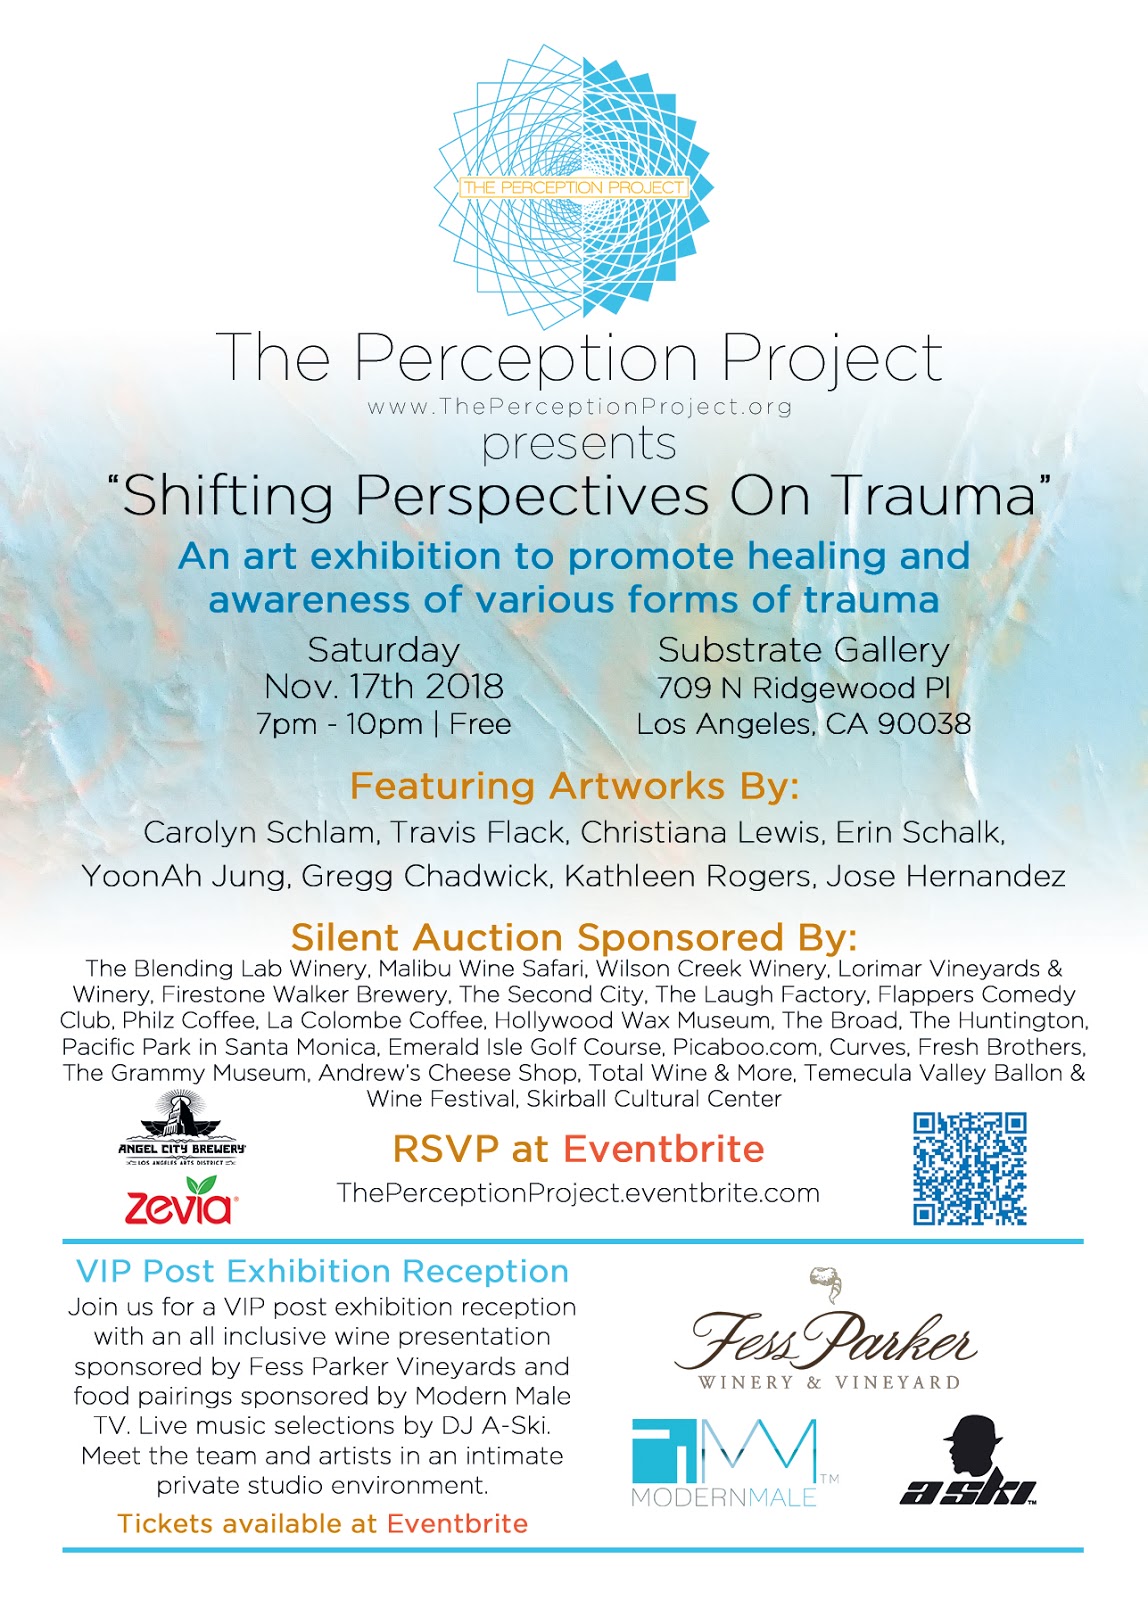 The Perception Project Is a Non-Profit That Uses Art to Heal Those Affected by Trauma